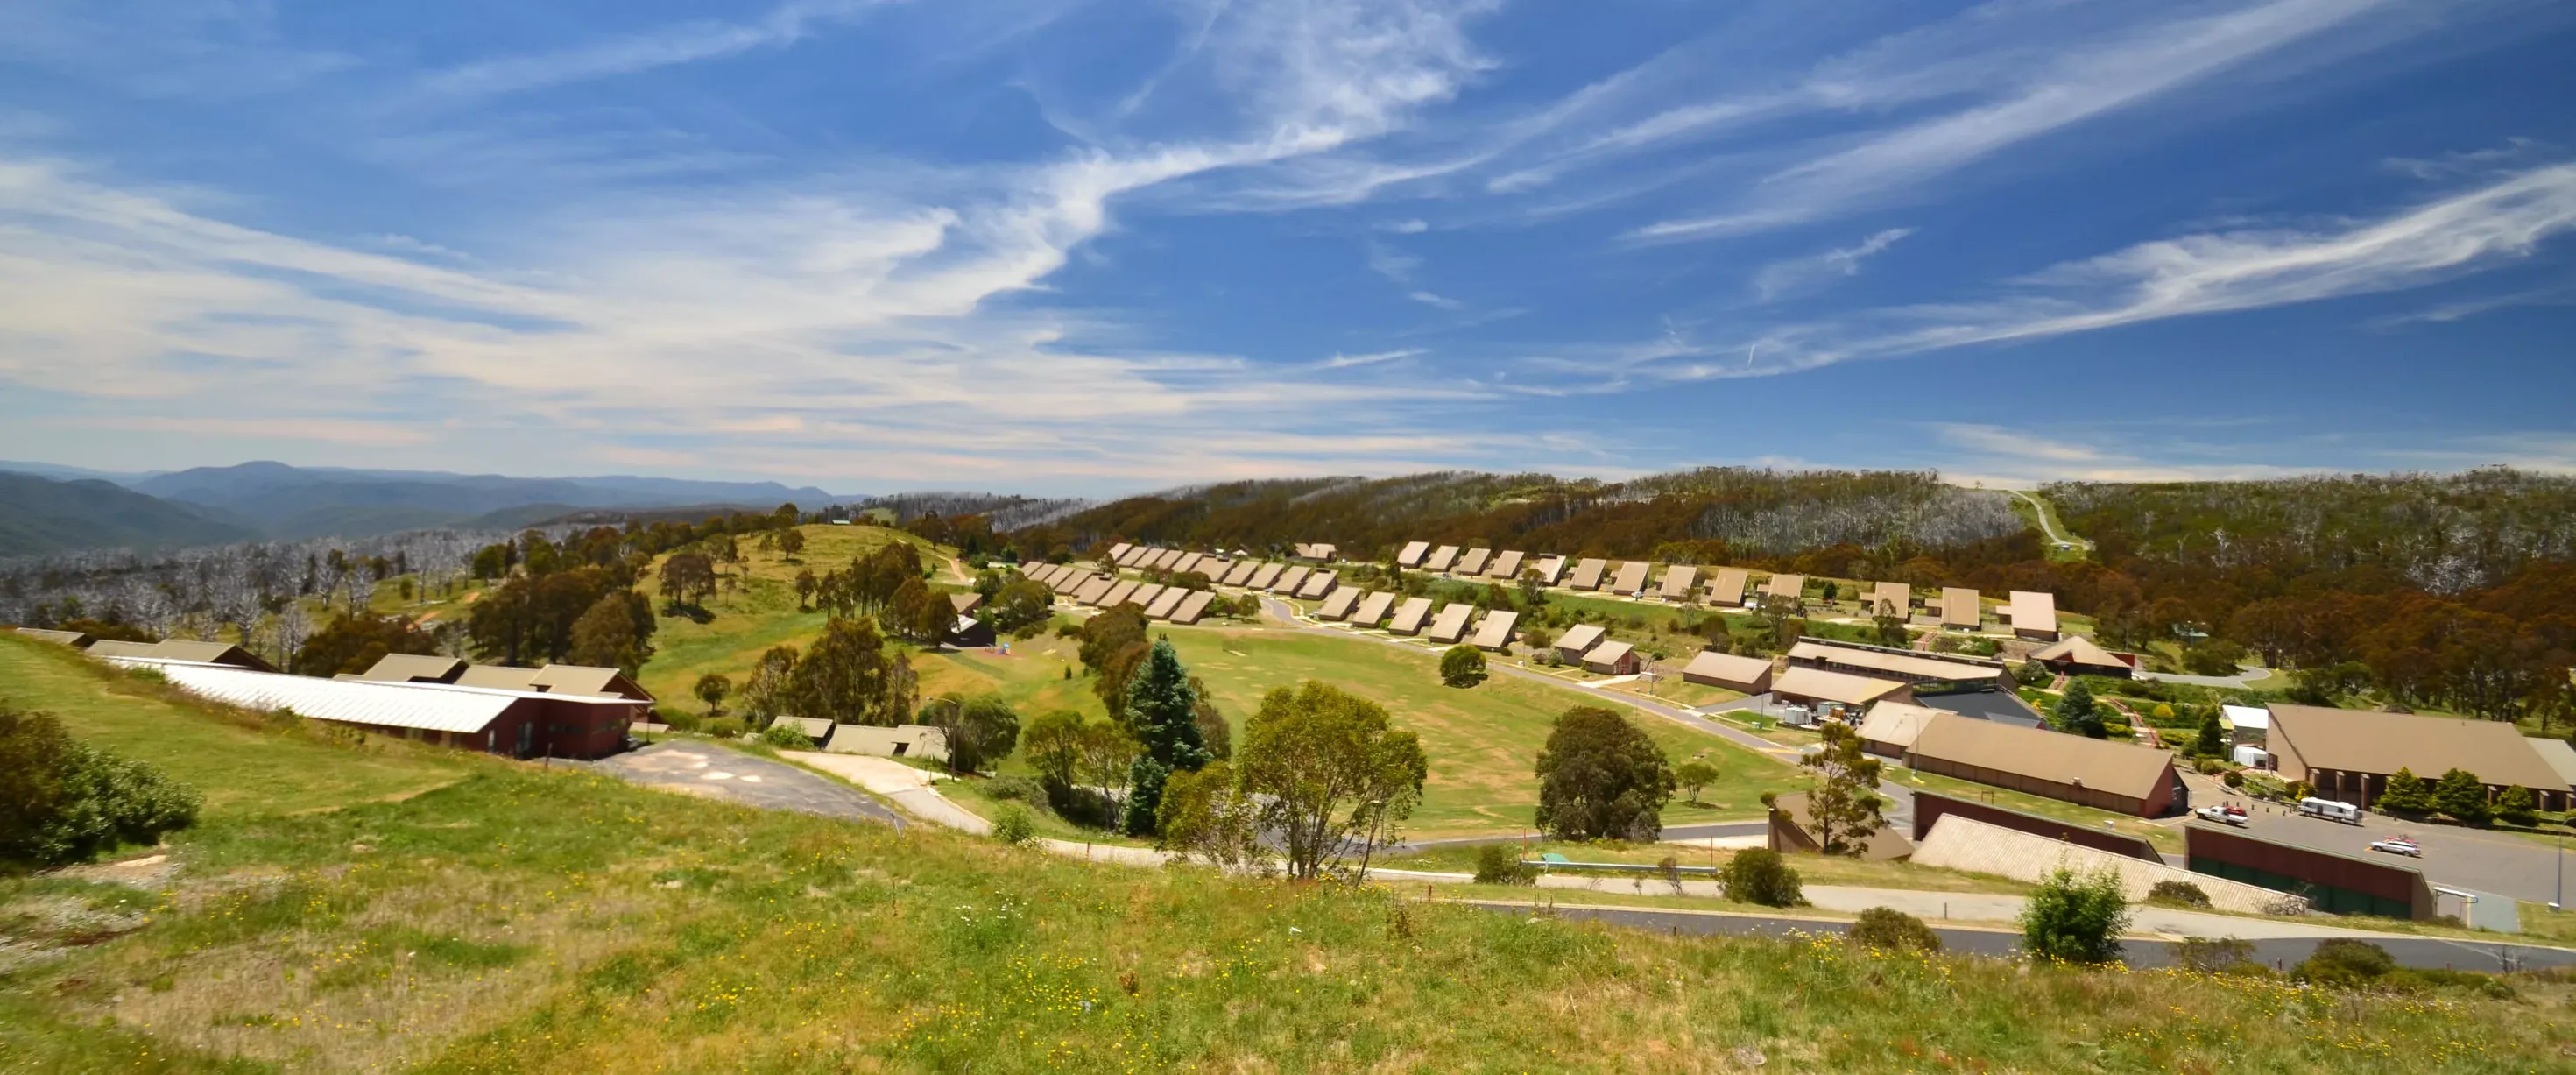 Cabramurra | New South Wales Region, Australia - Rated 6.6